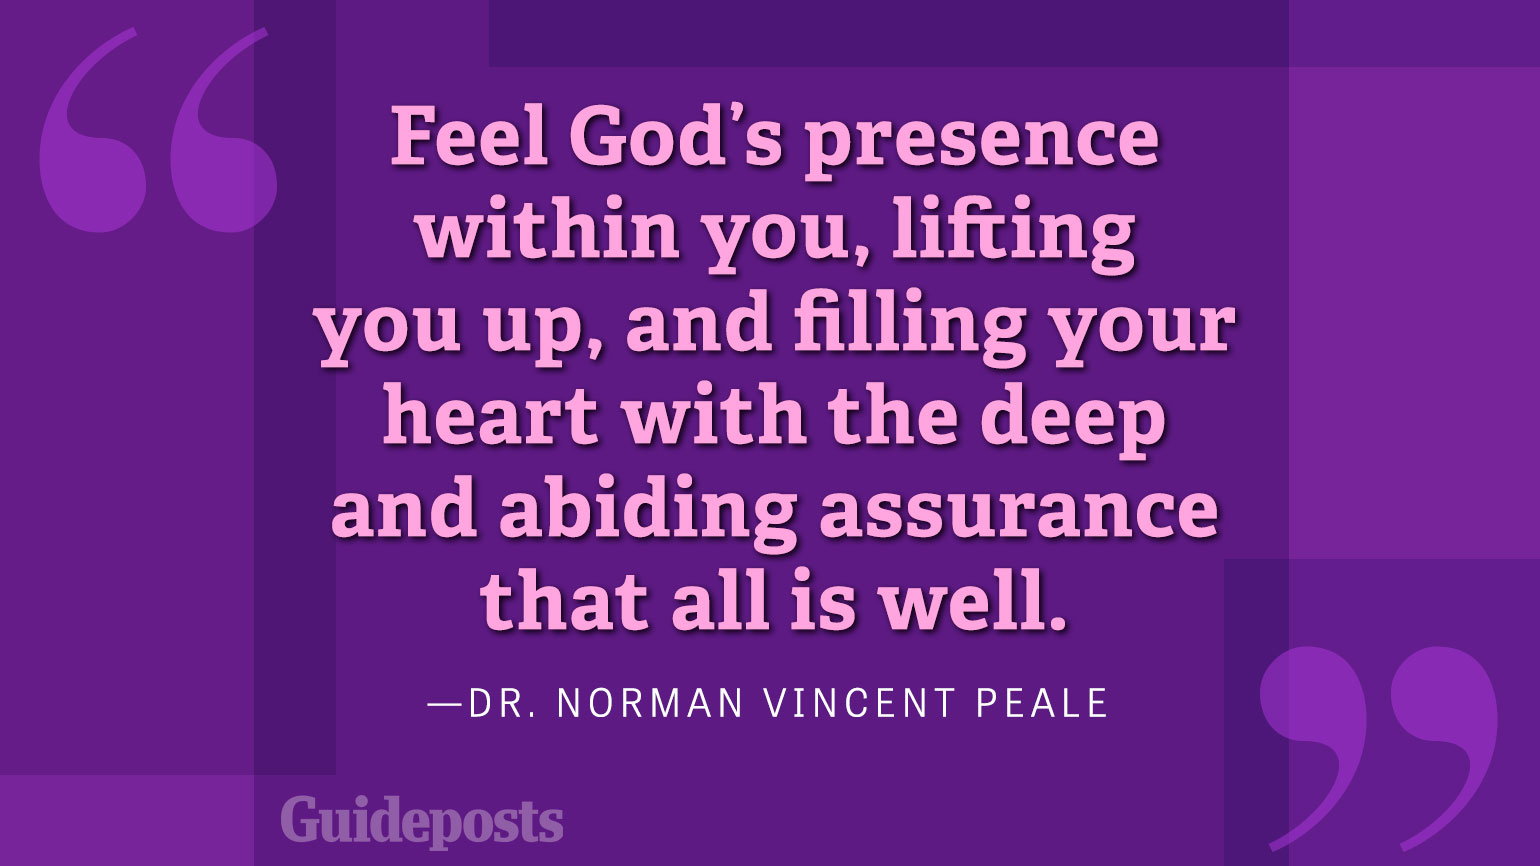 Feel God's presence within you, lifting you up, and filling your heart with the deep abiding assurance that all is well.